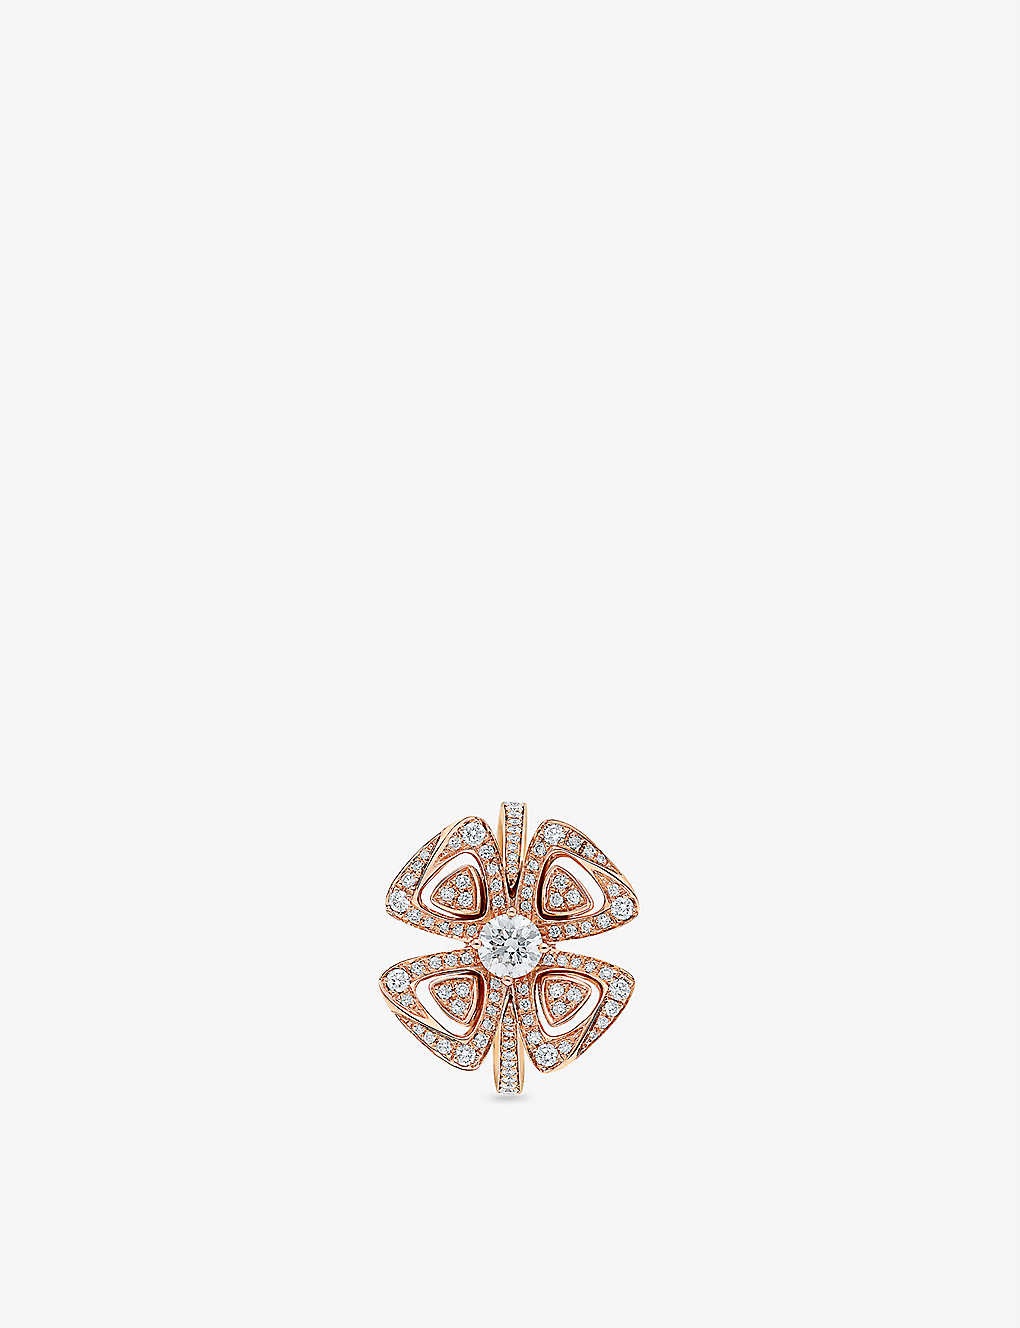 Fiorever 18ct rose gold and pavé diamond ring - 3